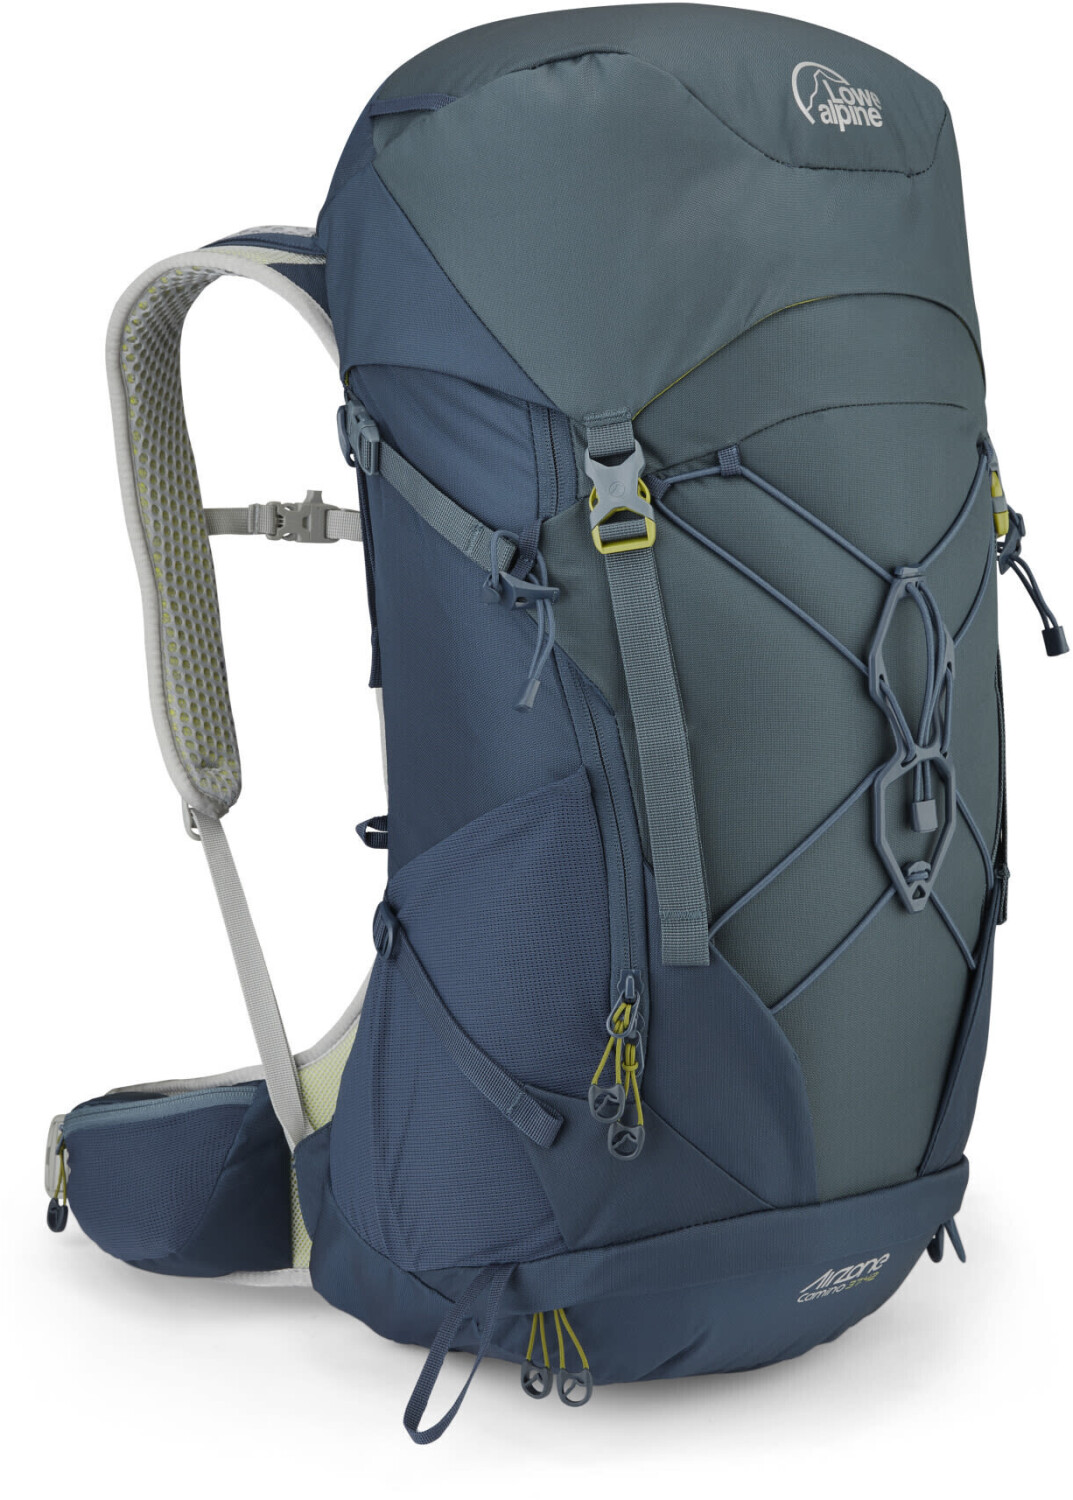 Photos - Backpack Lowe Alpine AirZone Trail Camino 37:42 M blue night/orion blue 